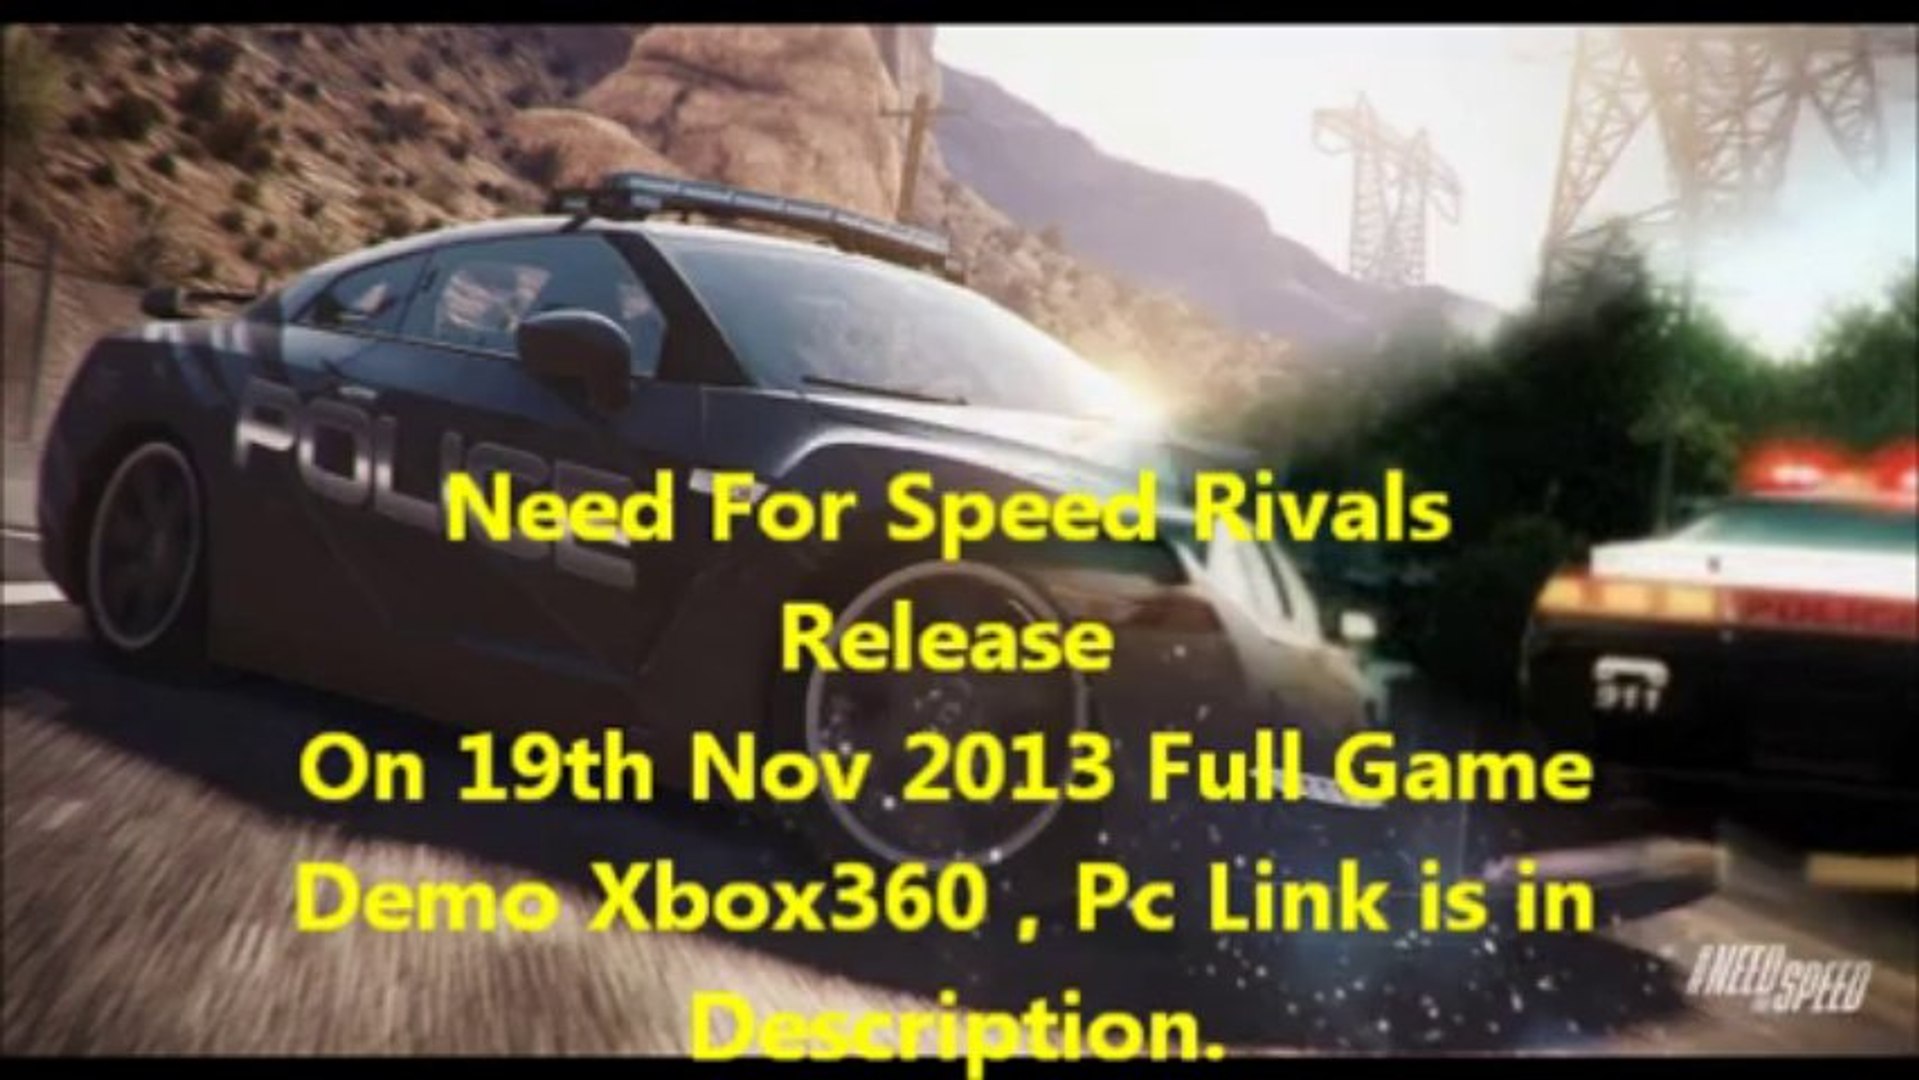 need for speed rivals pc xbox360 full game demo - video Dailymotion